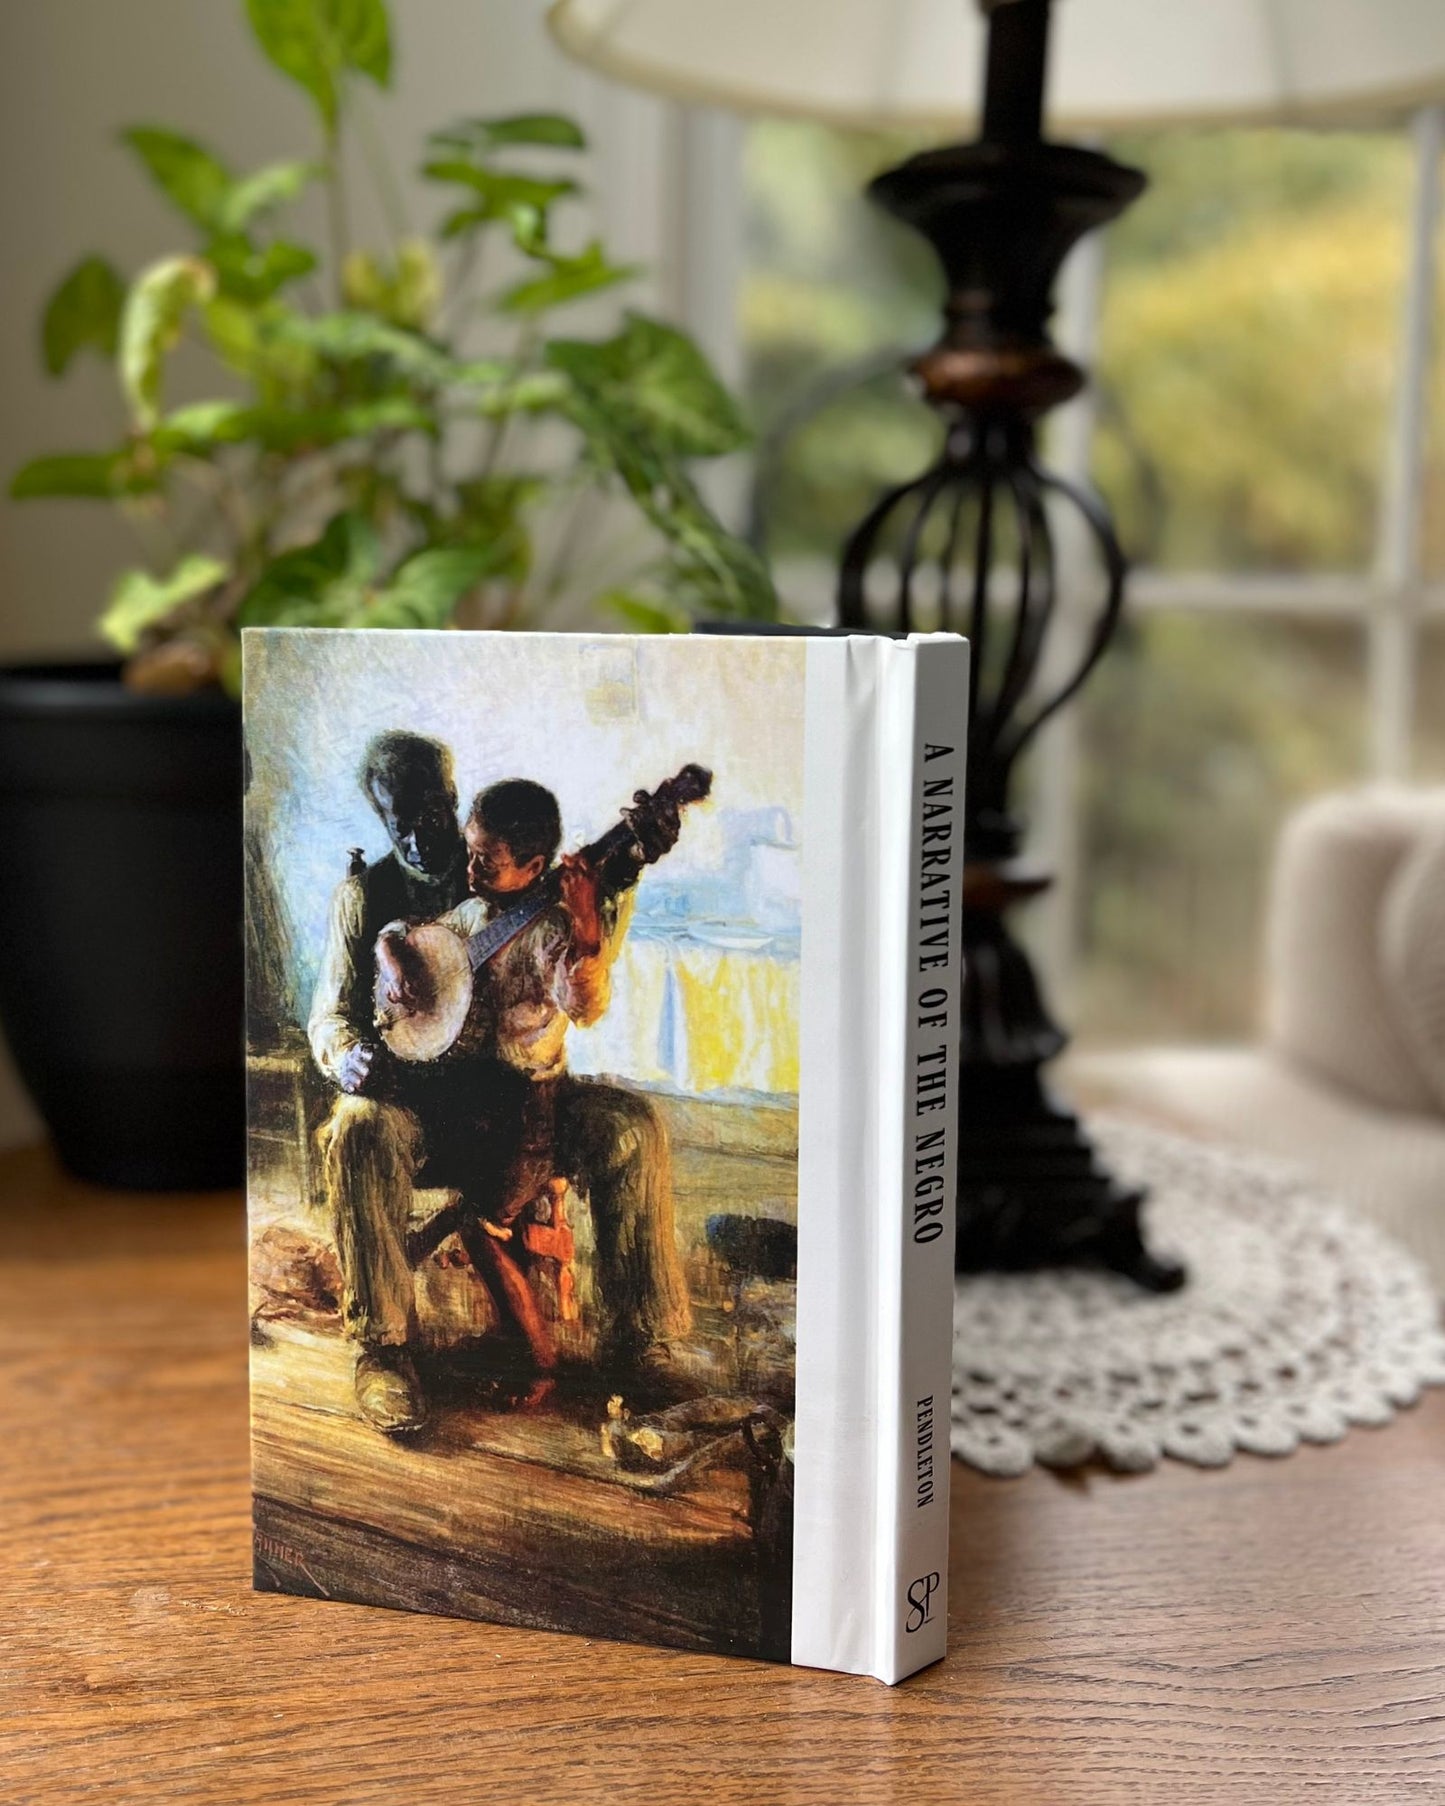 The back of the special hardback of A Narrative of the Negro has a famous painting of an older black man teaching a young brown-skinned boy to play the banjo. The book stands in front of a blurred background including a lamp on a doily and plant.